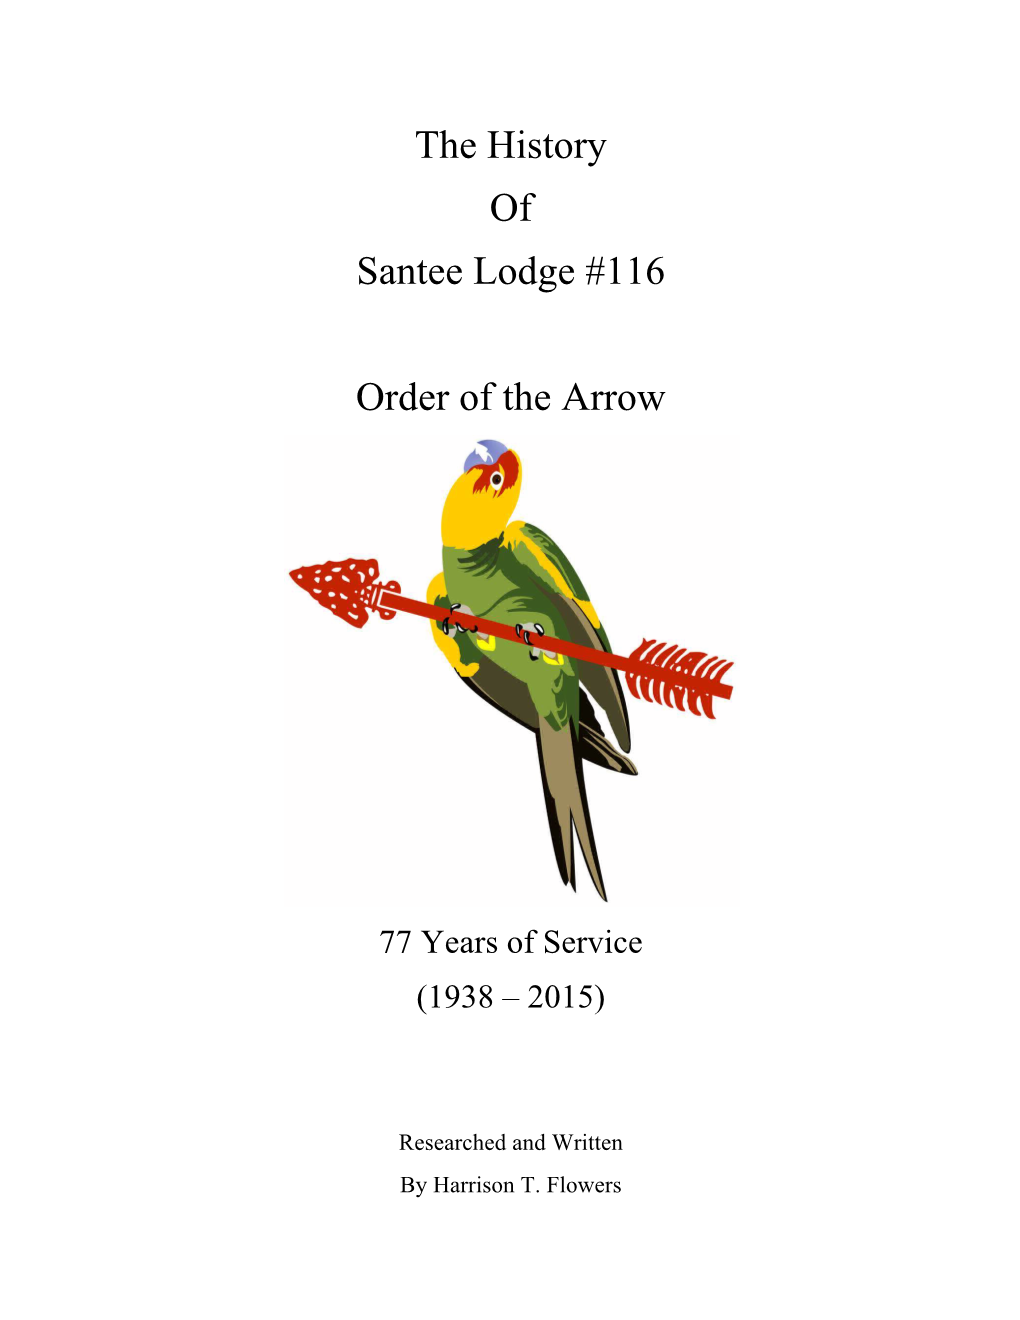 The History of Santee Lodge #116 Order of the Arrow